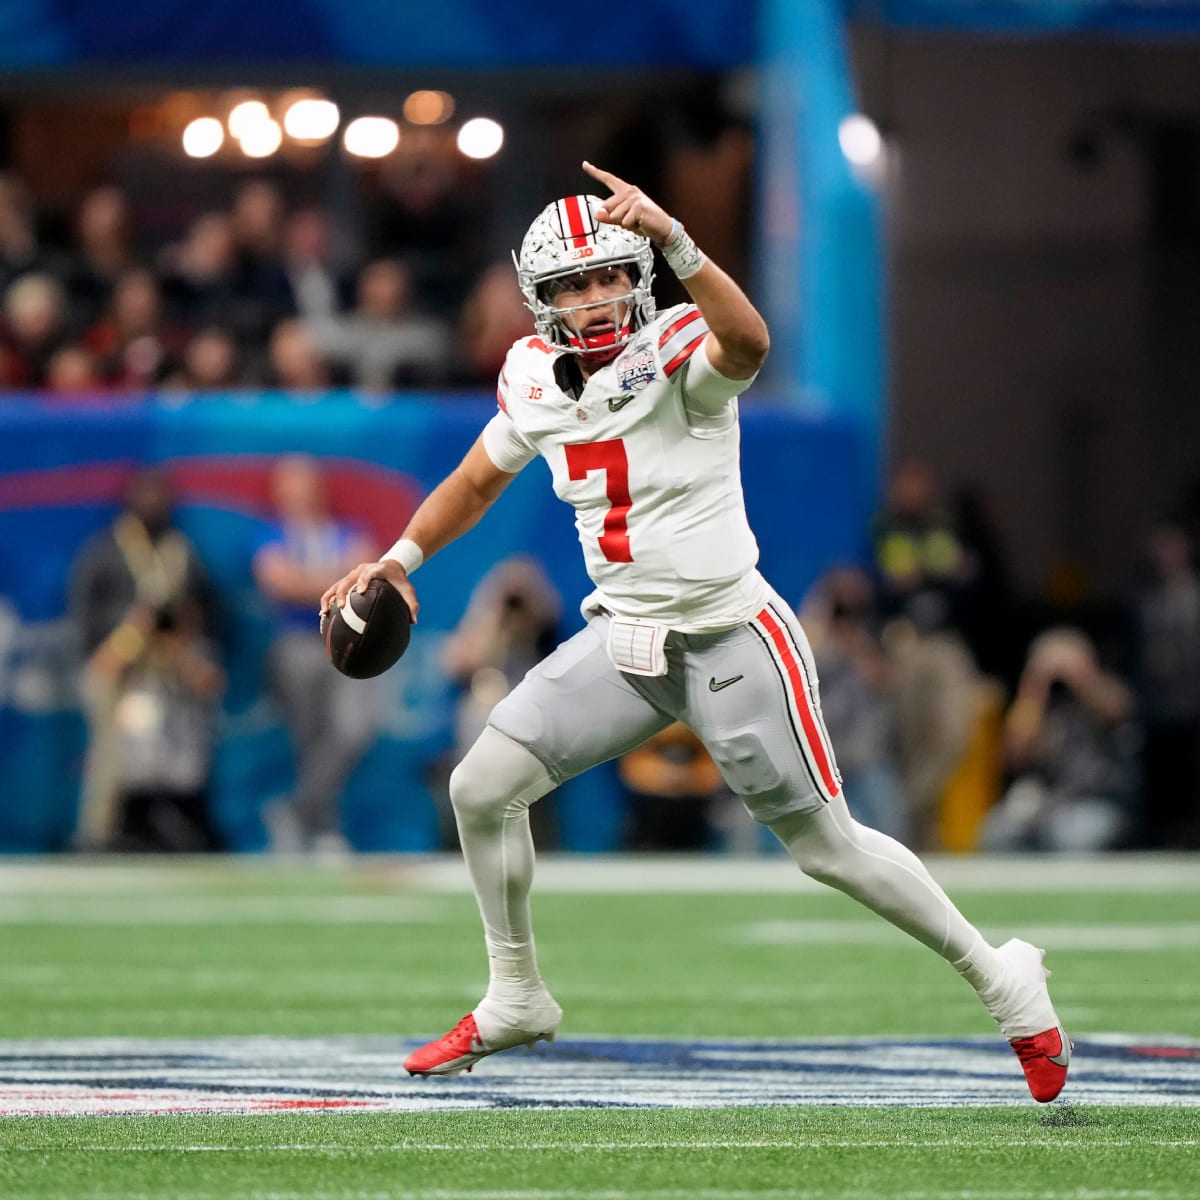 Texans select Ohio State QB C.J. Stroud with the #2 pick of the